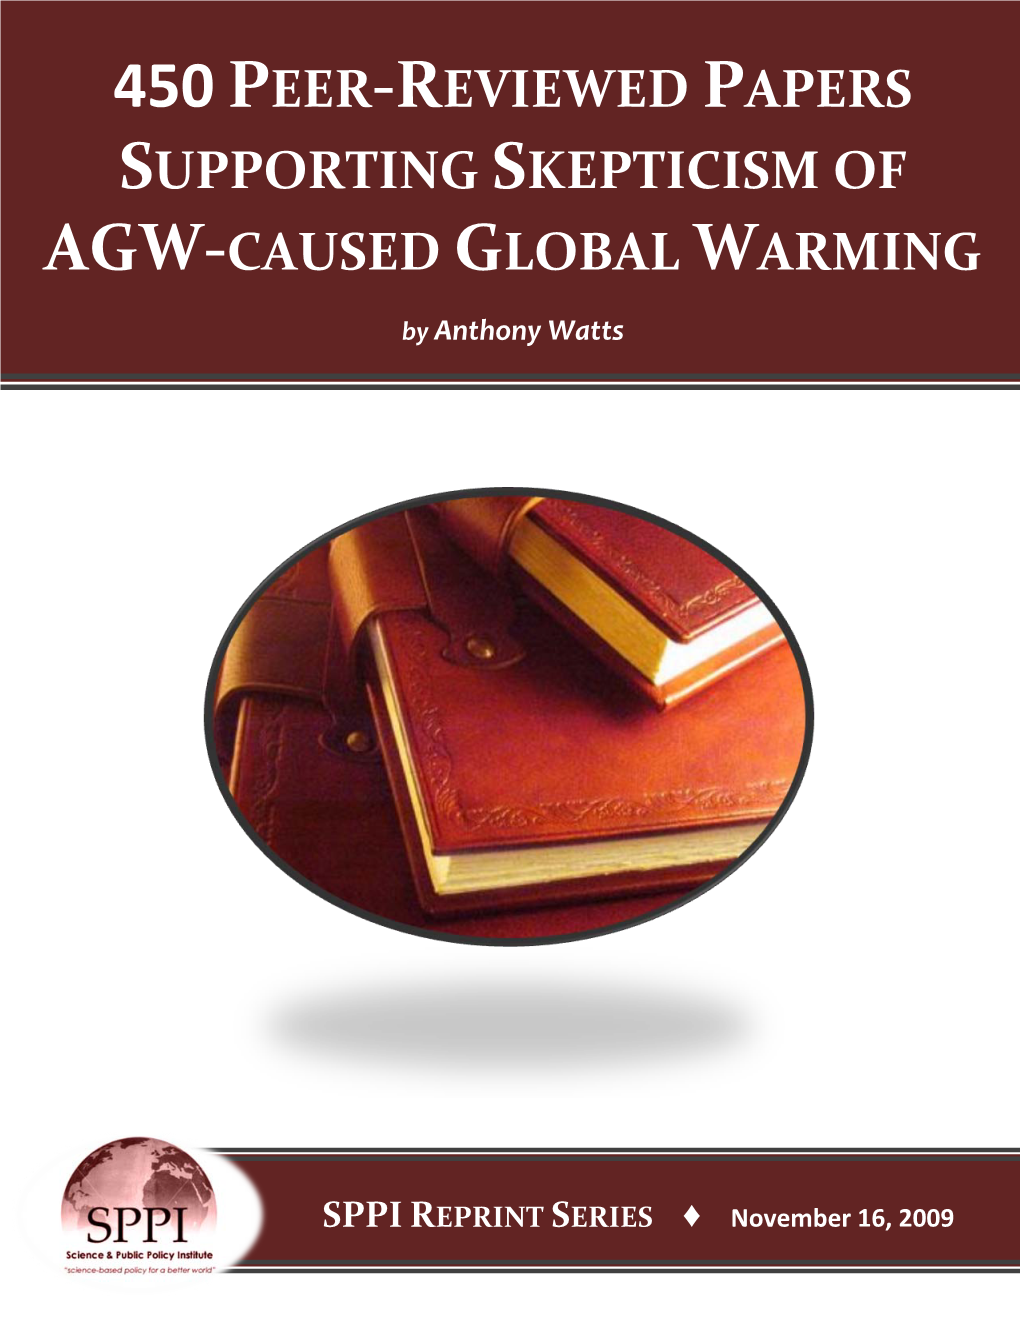 450 Peer-Reviewed Papers Supporting Skepticism of Agw-Caused Global Warming